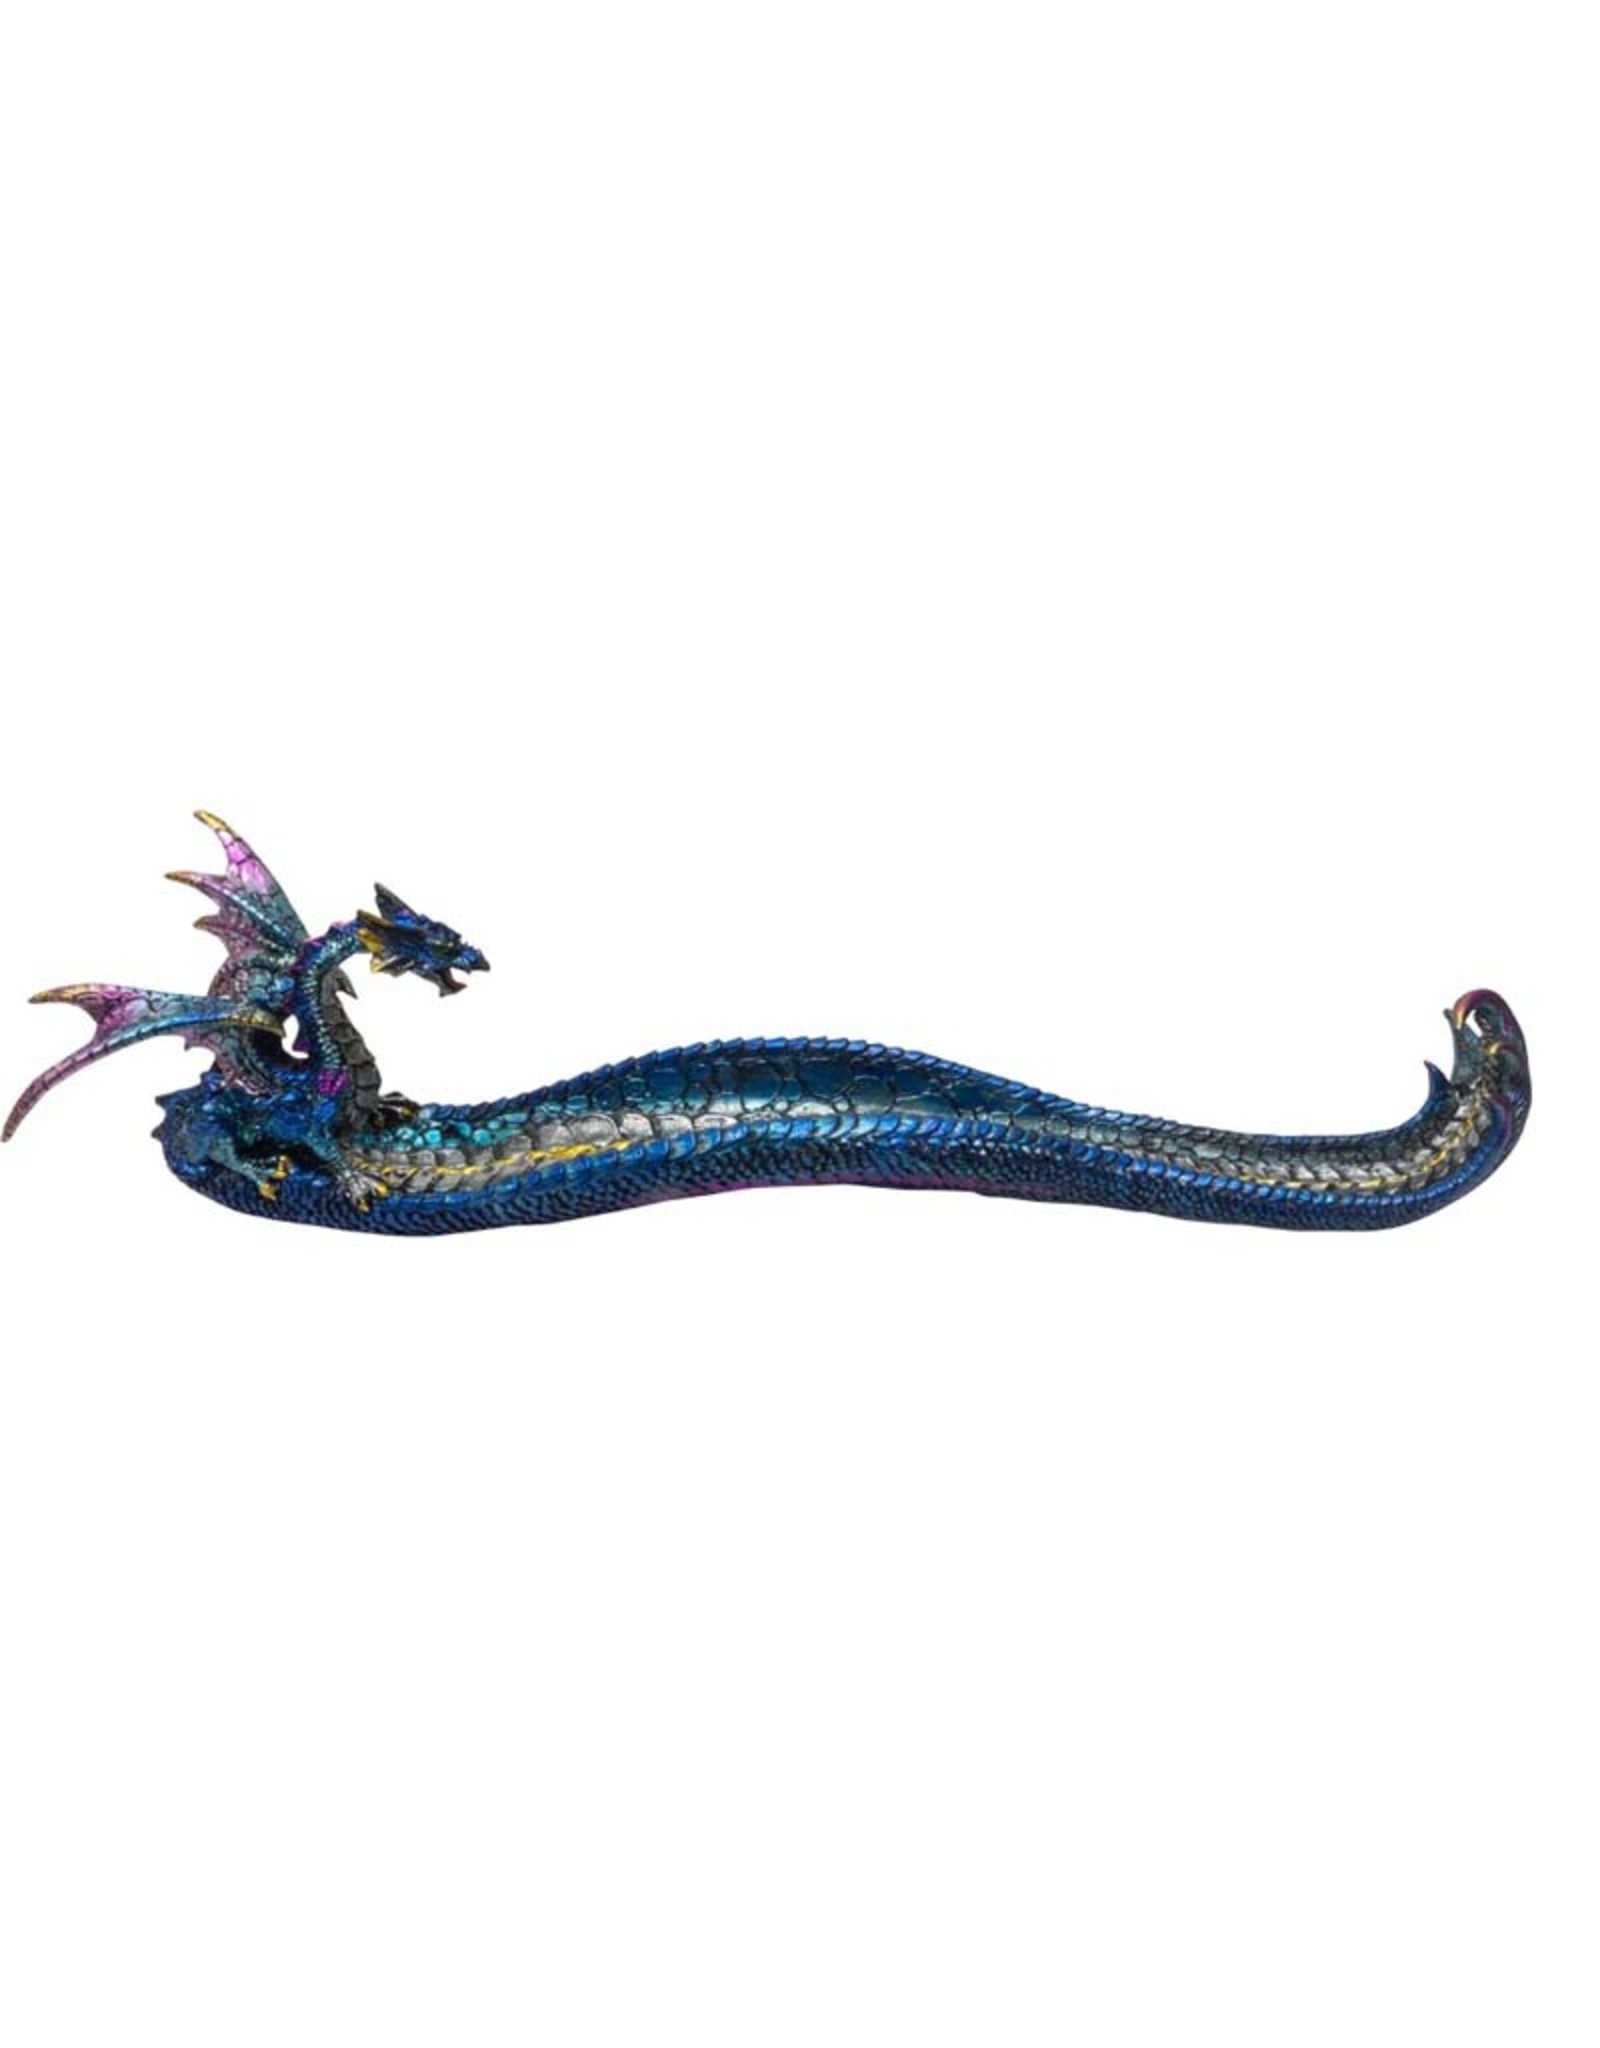 Blue Dragon with Claw Incense Burner 12"